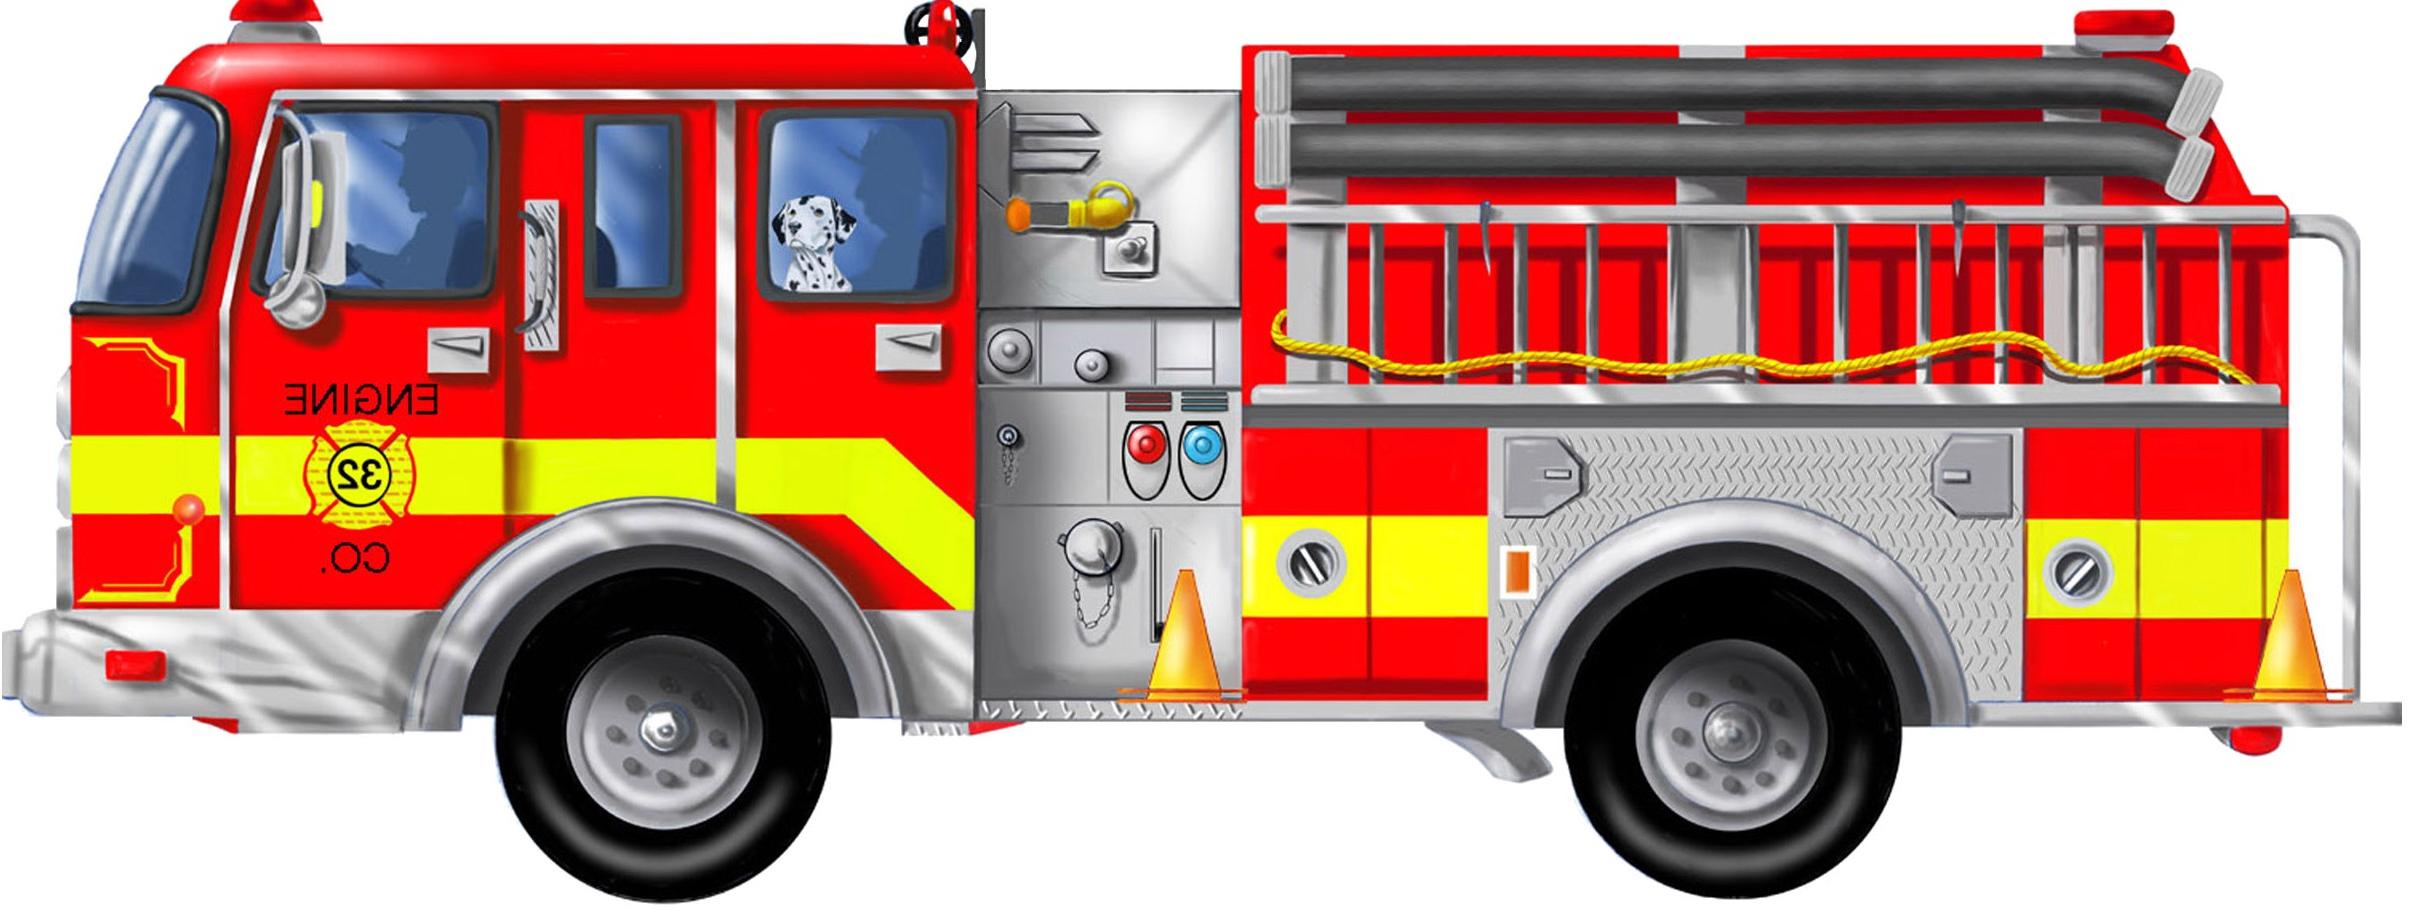 Fire Engine Clipart Image: Ca